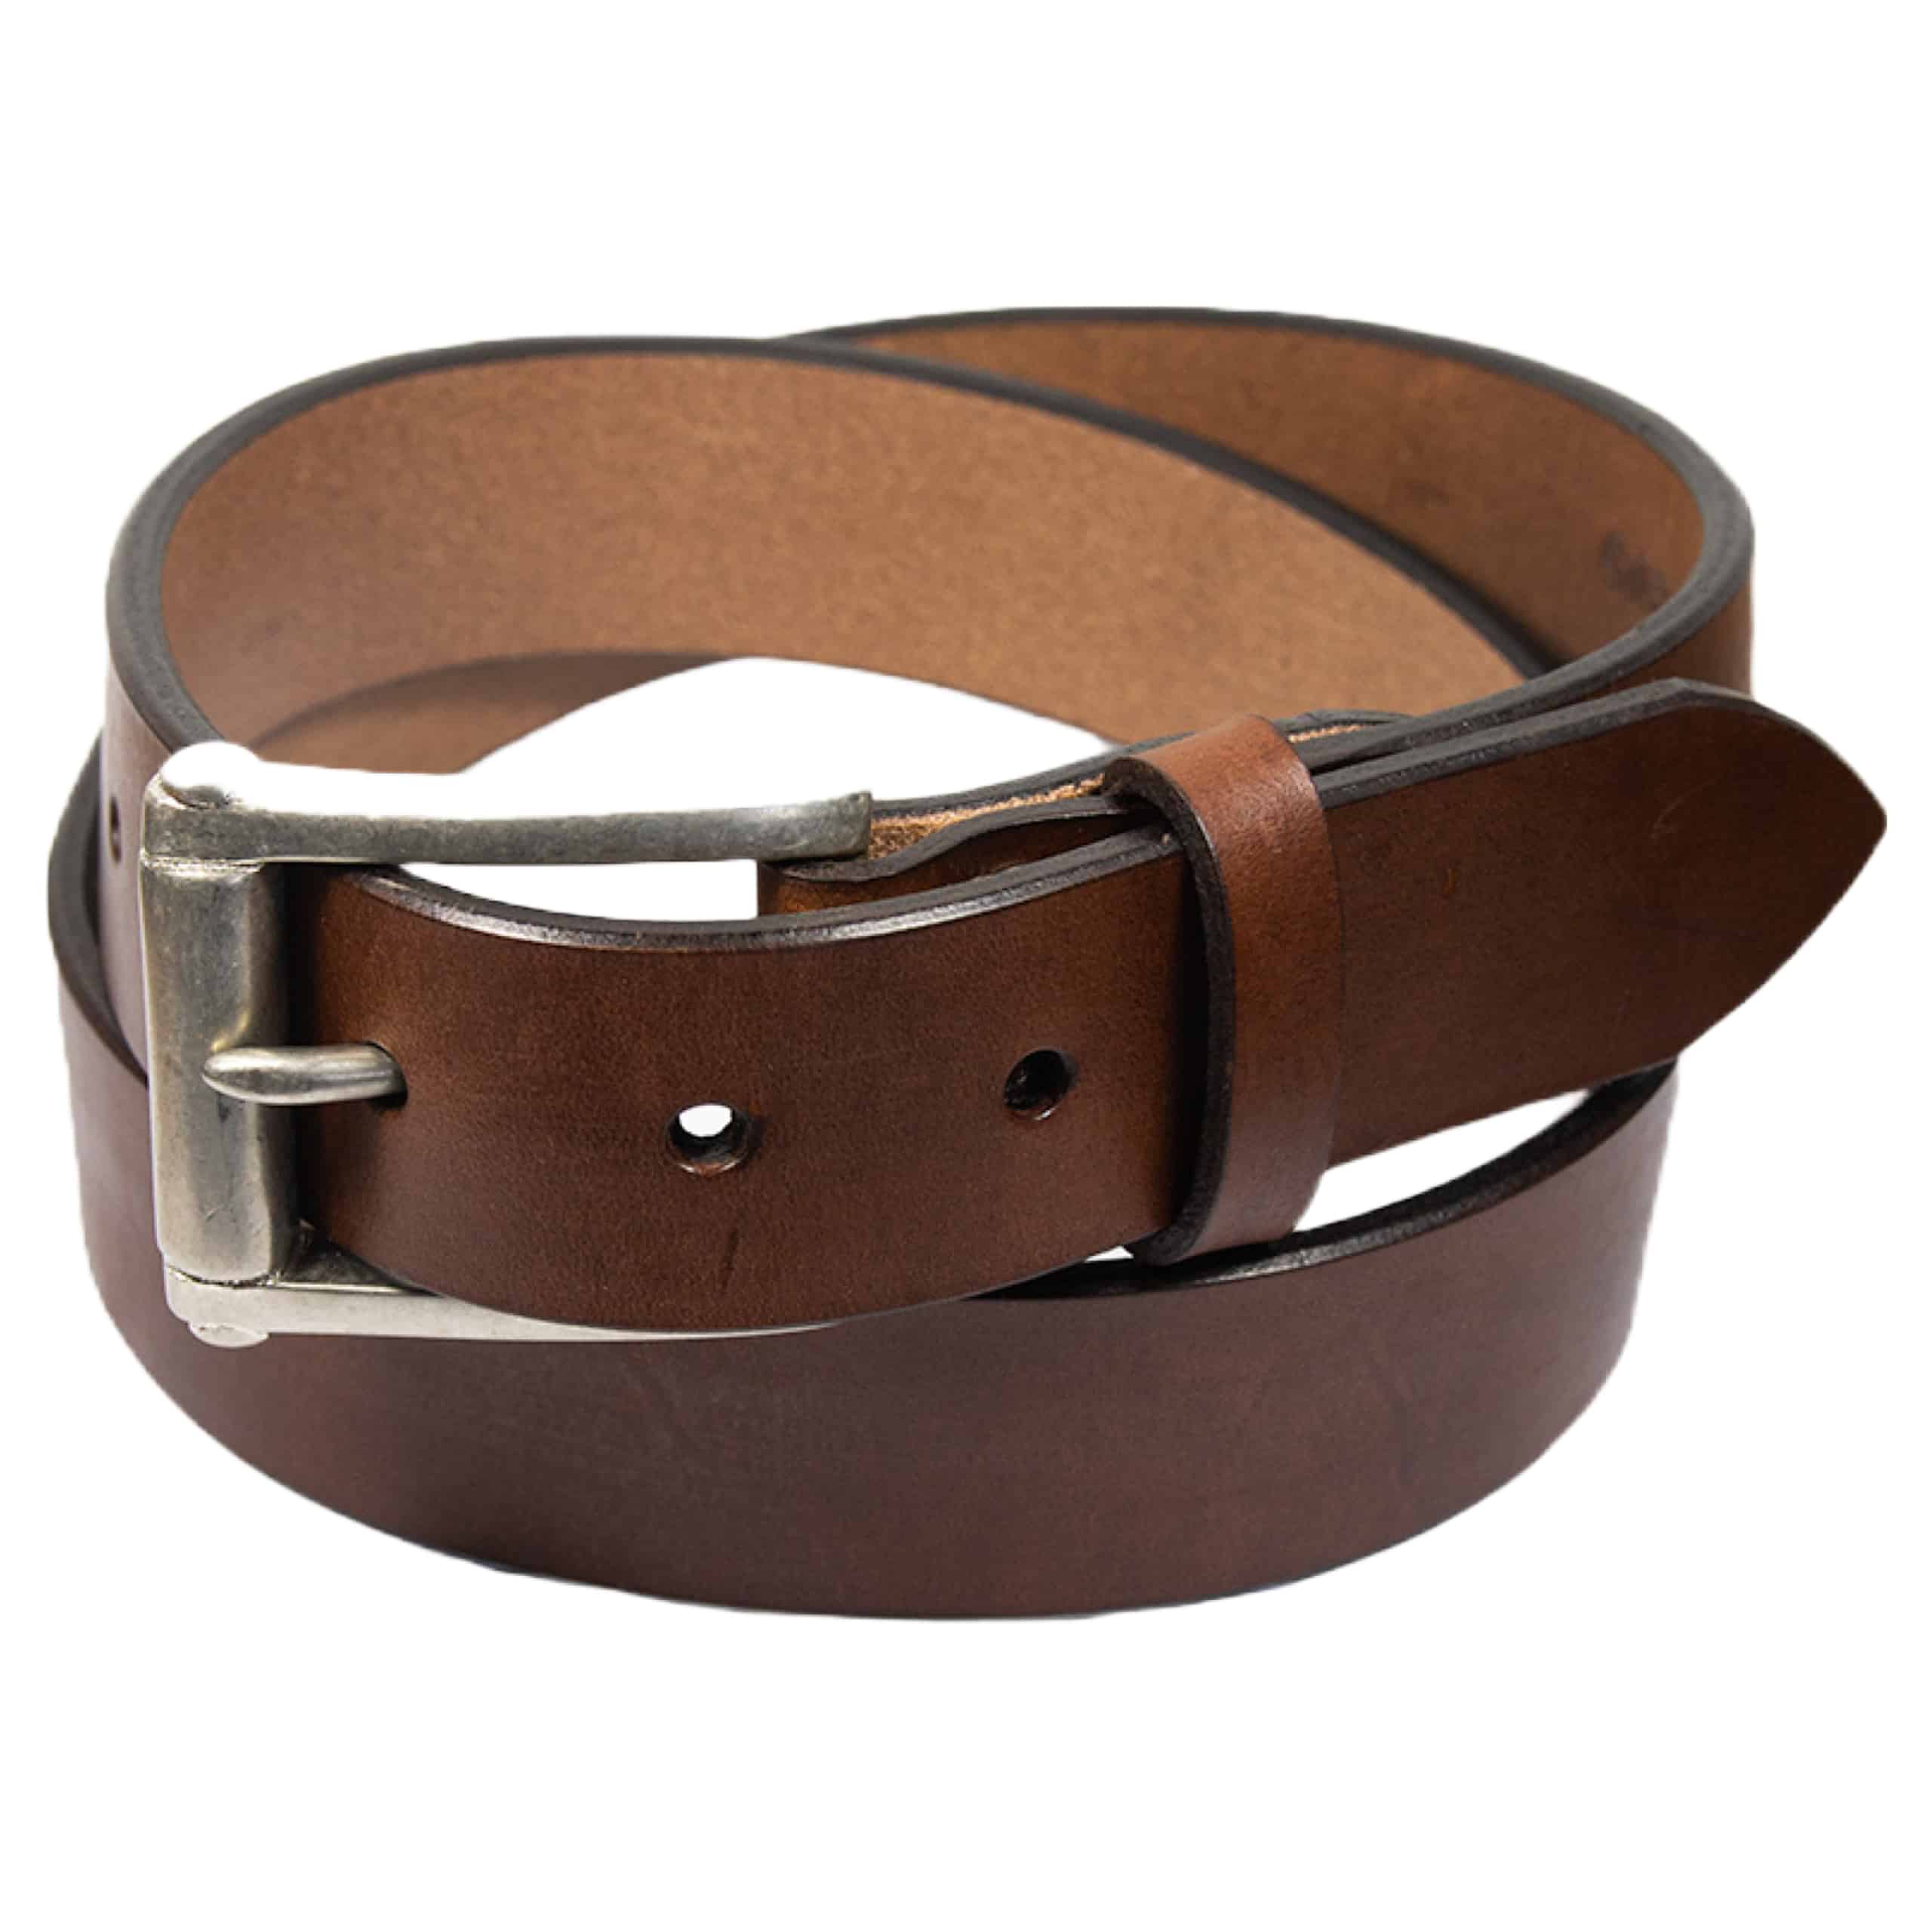 Garrison Leather Belt in Oak Bark leather by Barnes and Moore